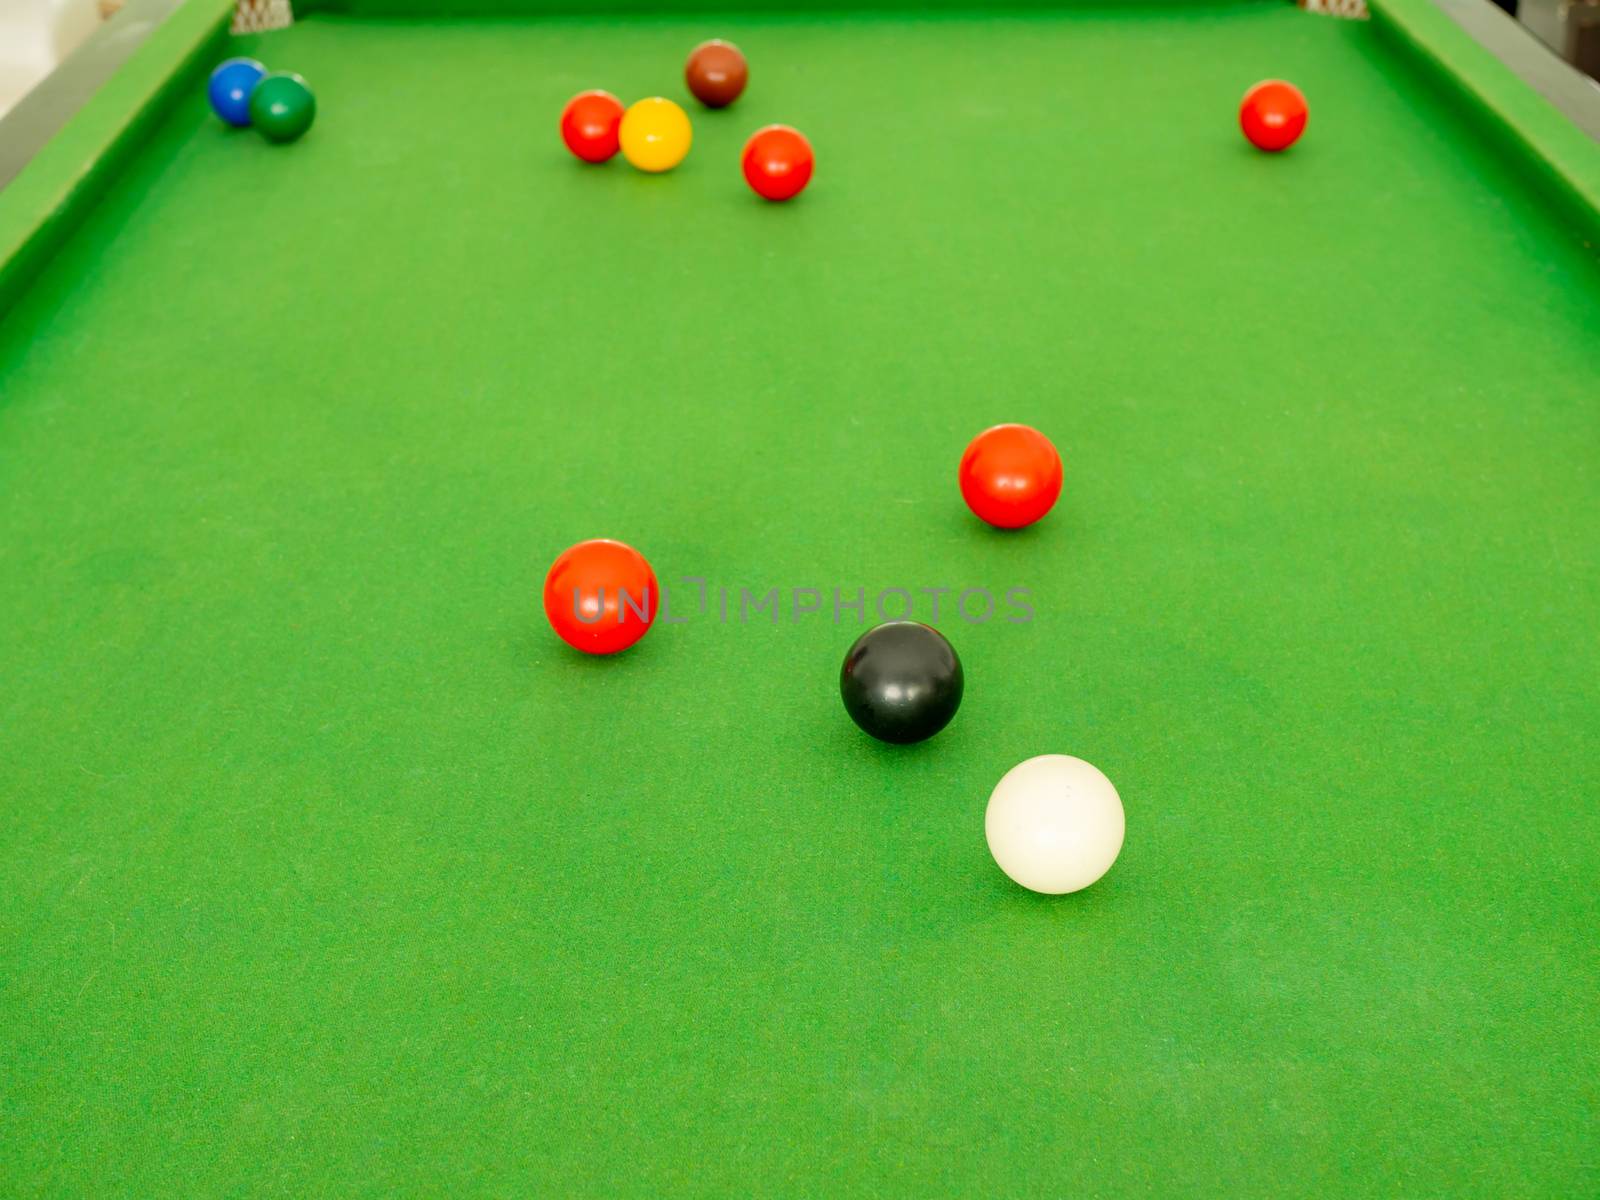 Snooker ball On the green snooker table by Unimages2527